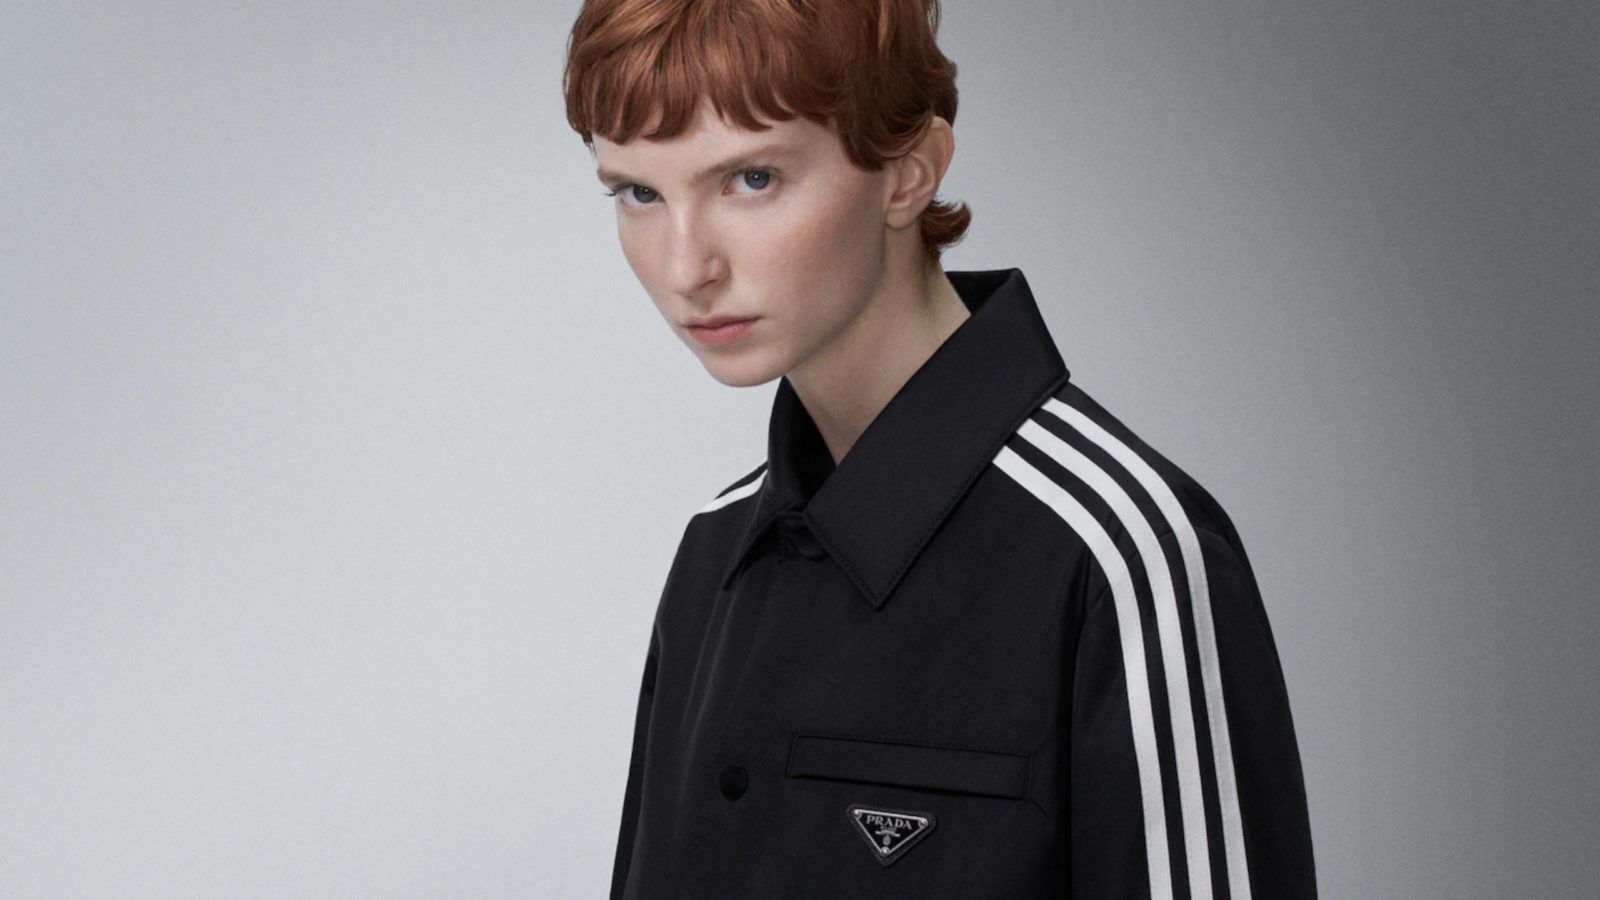 Sortie Productive anywhere Prada and Adidas will enter the metaverse with their Re-Nylon collection